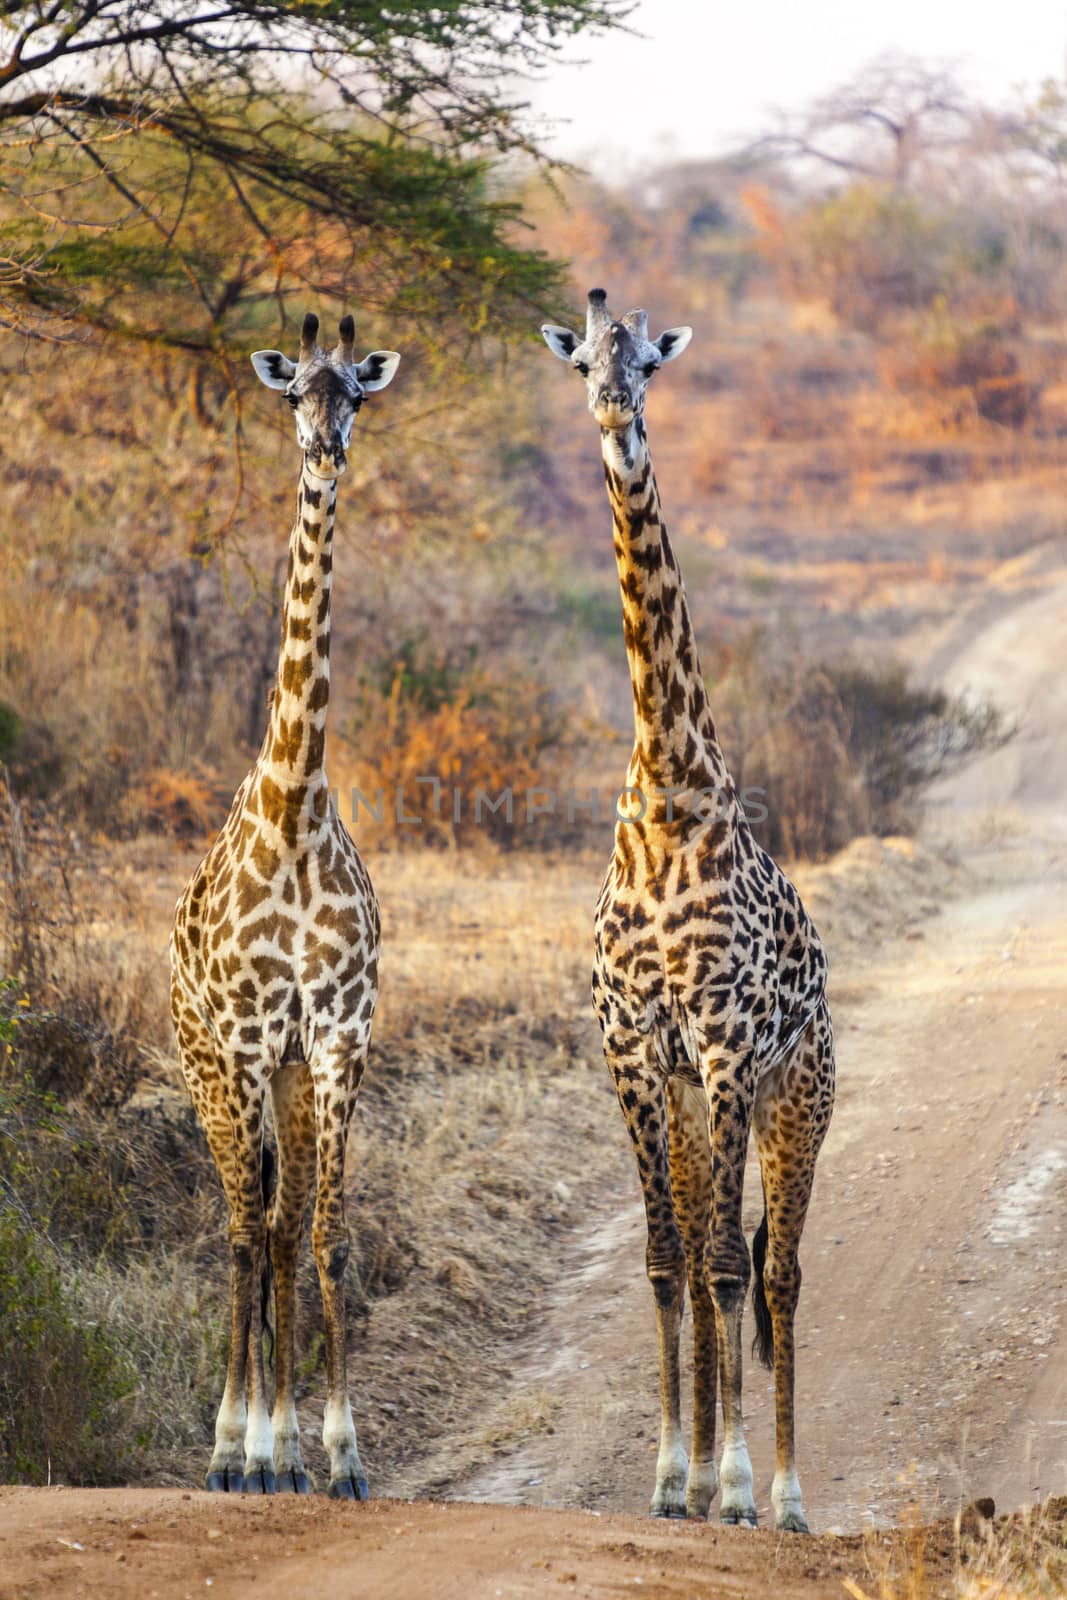 Walking giraffes on the road in the wilderness of Tanzania